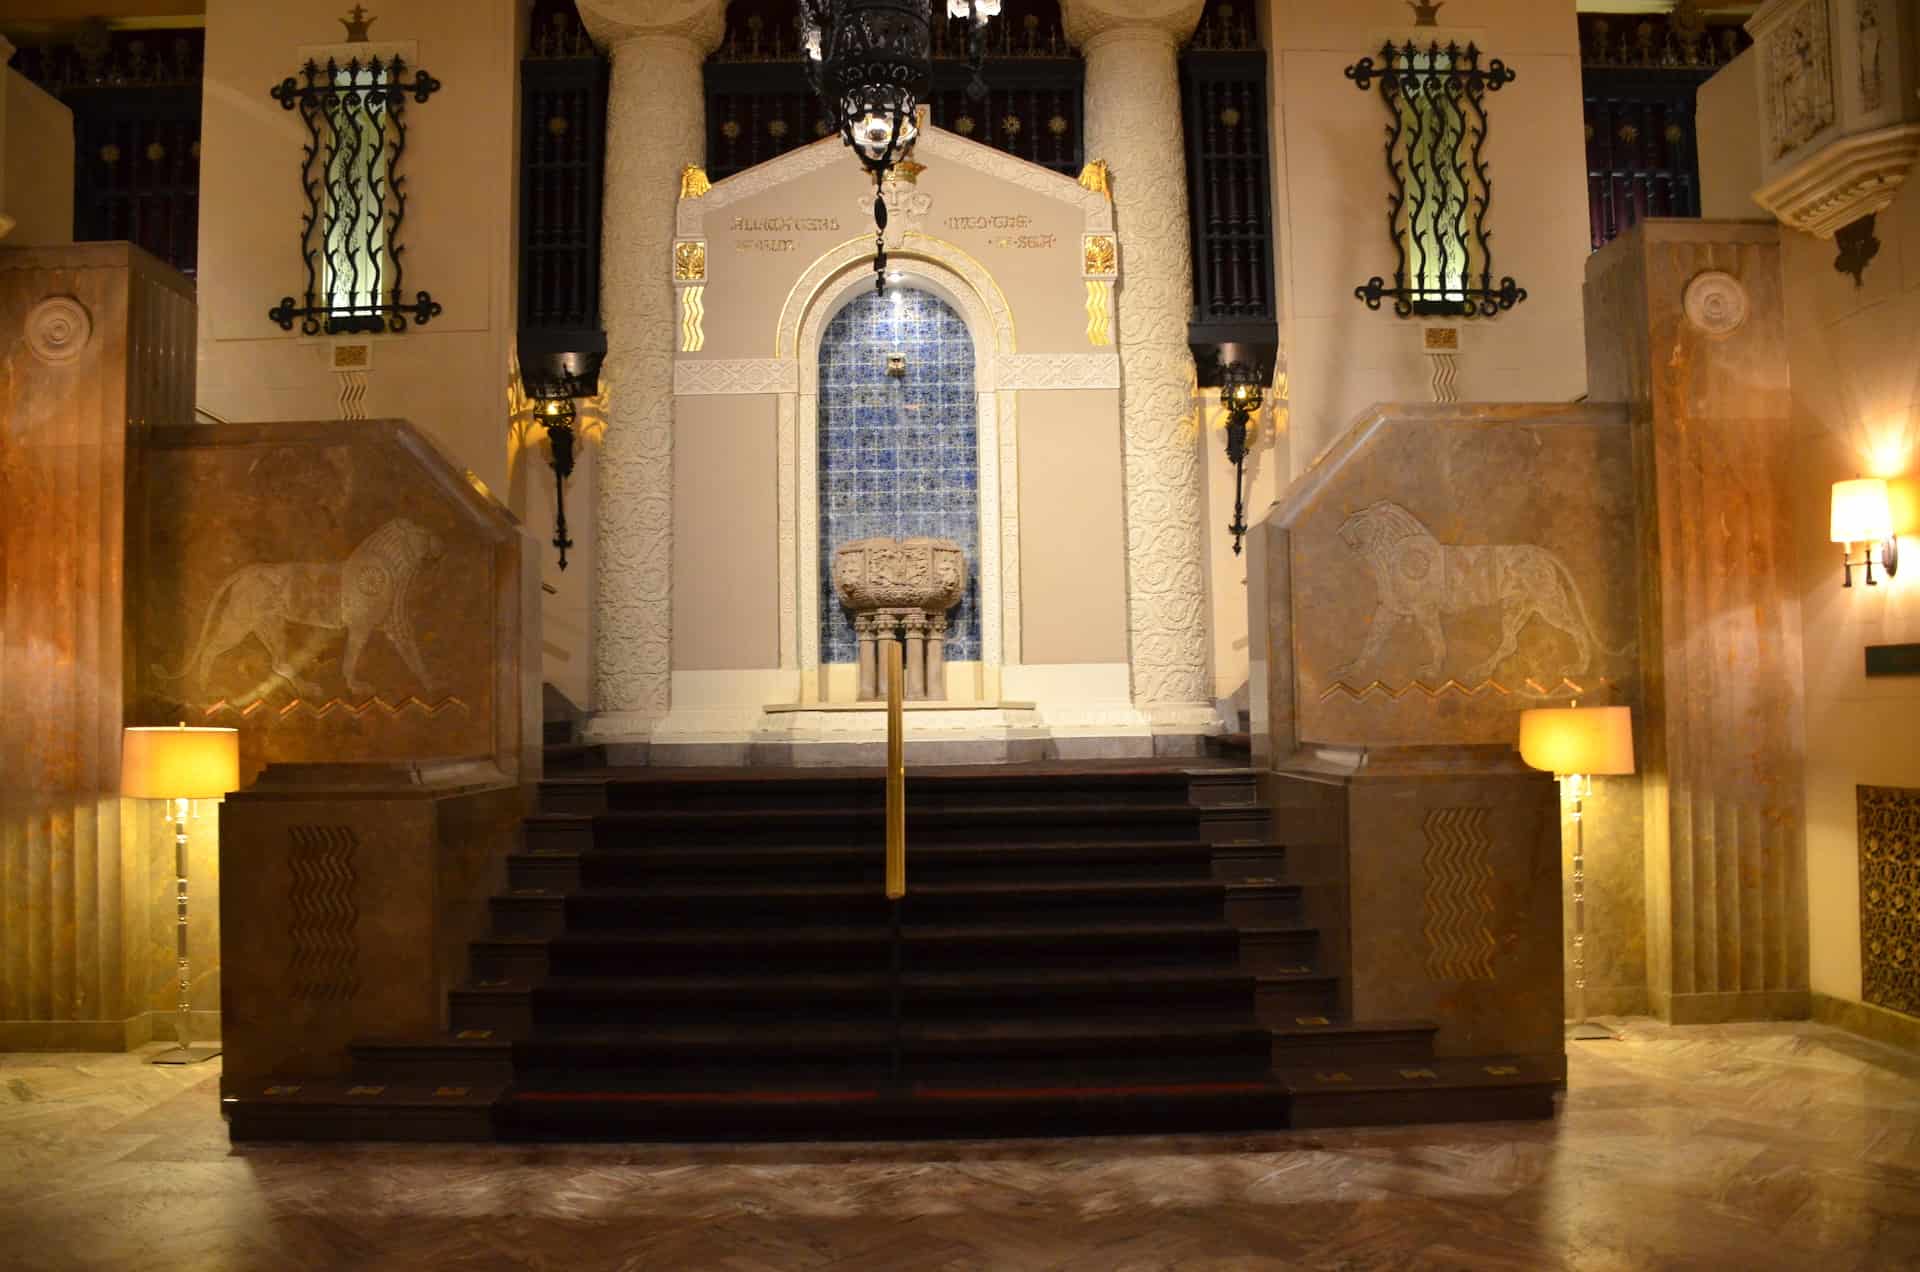 King Arthur Court at the Hotel InterContinental in Chicago, Illinois